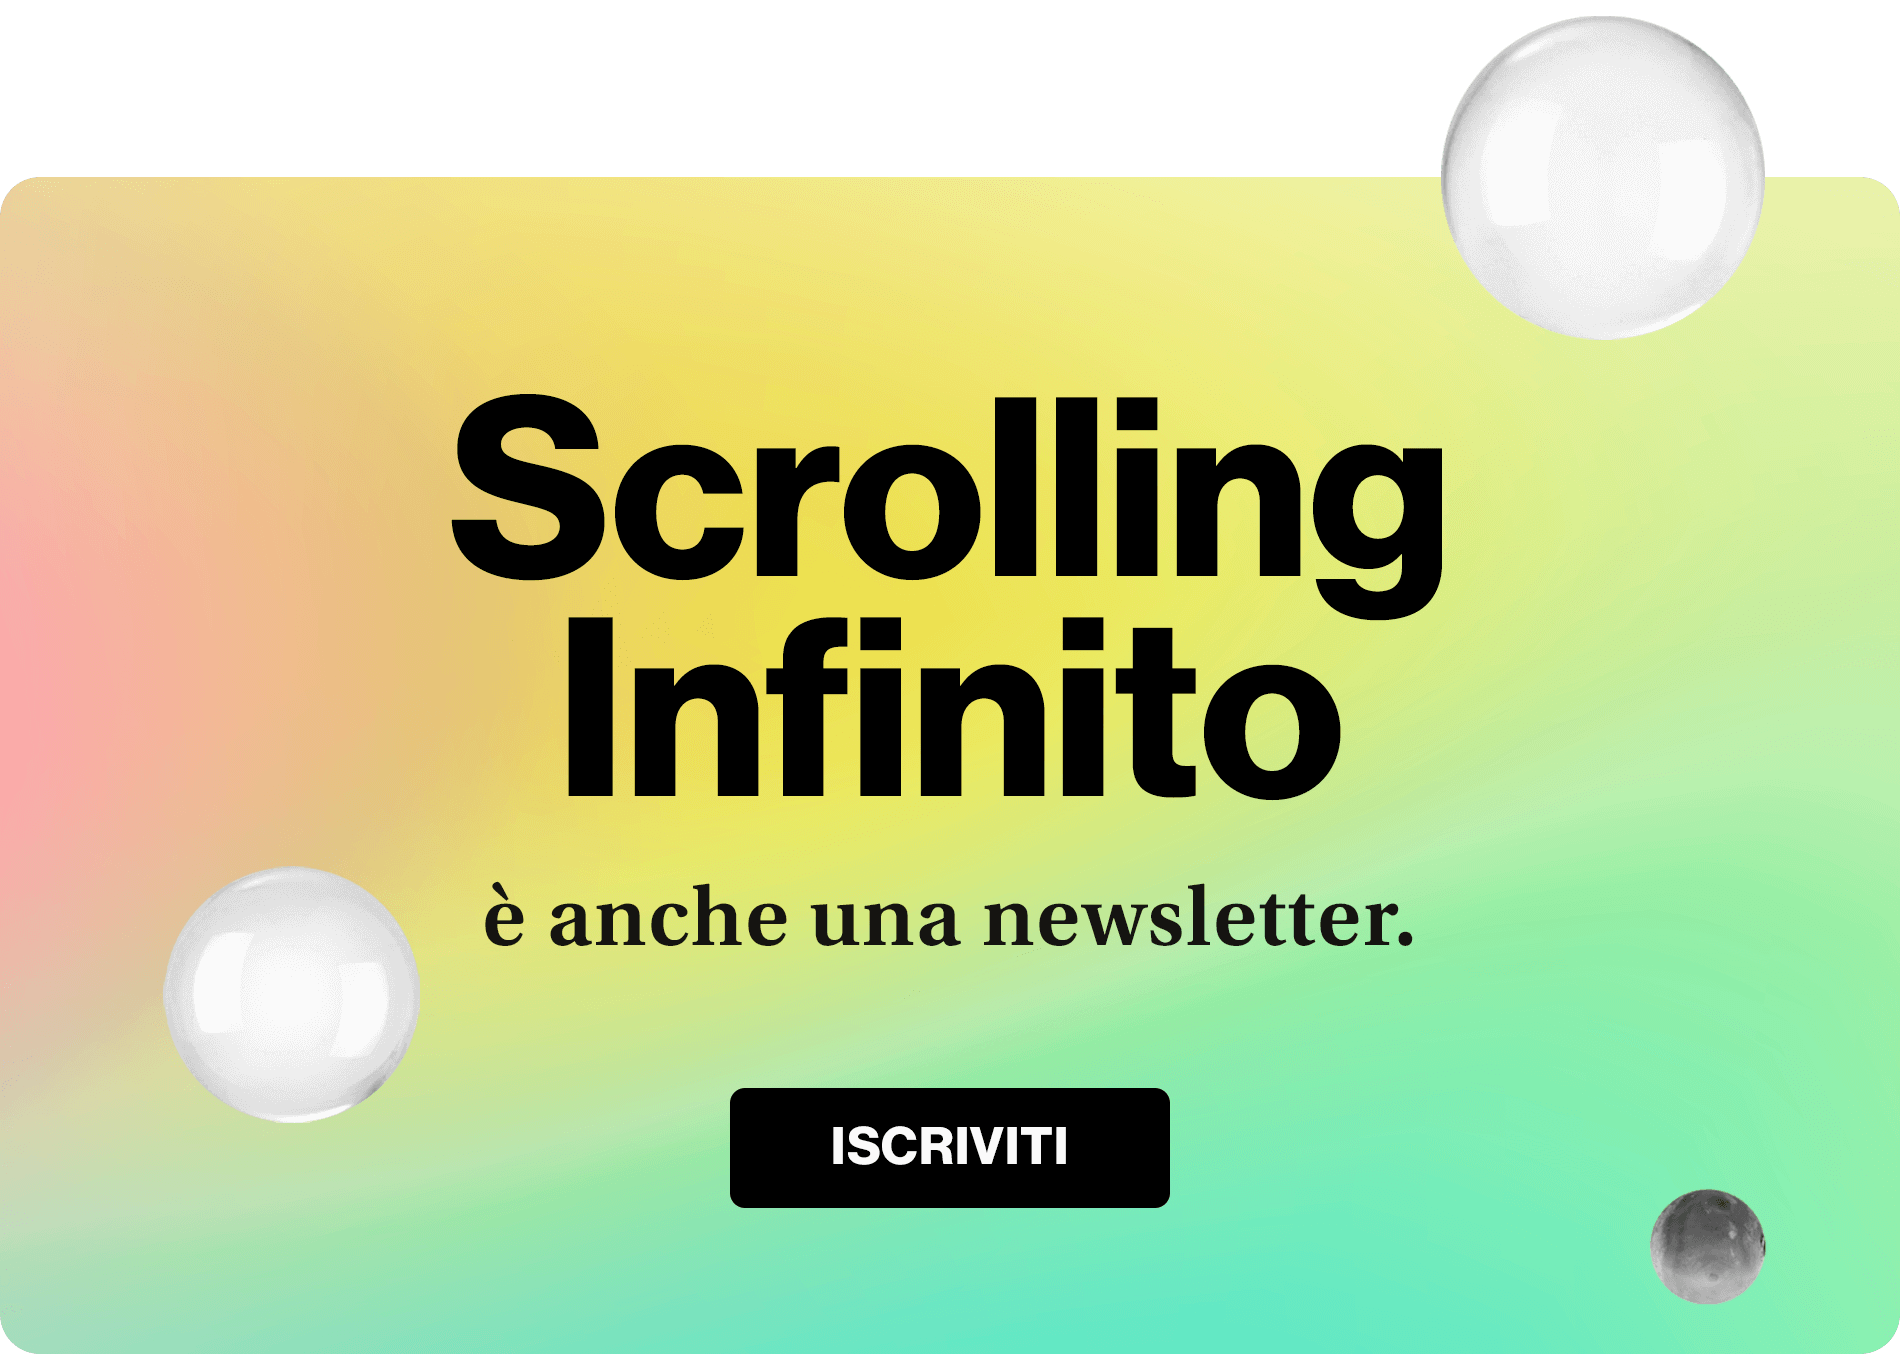 Scrolling Infinito Newsletter